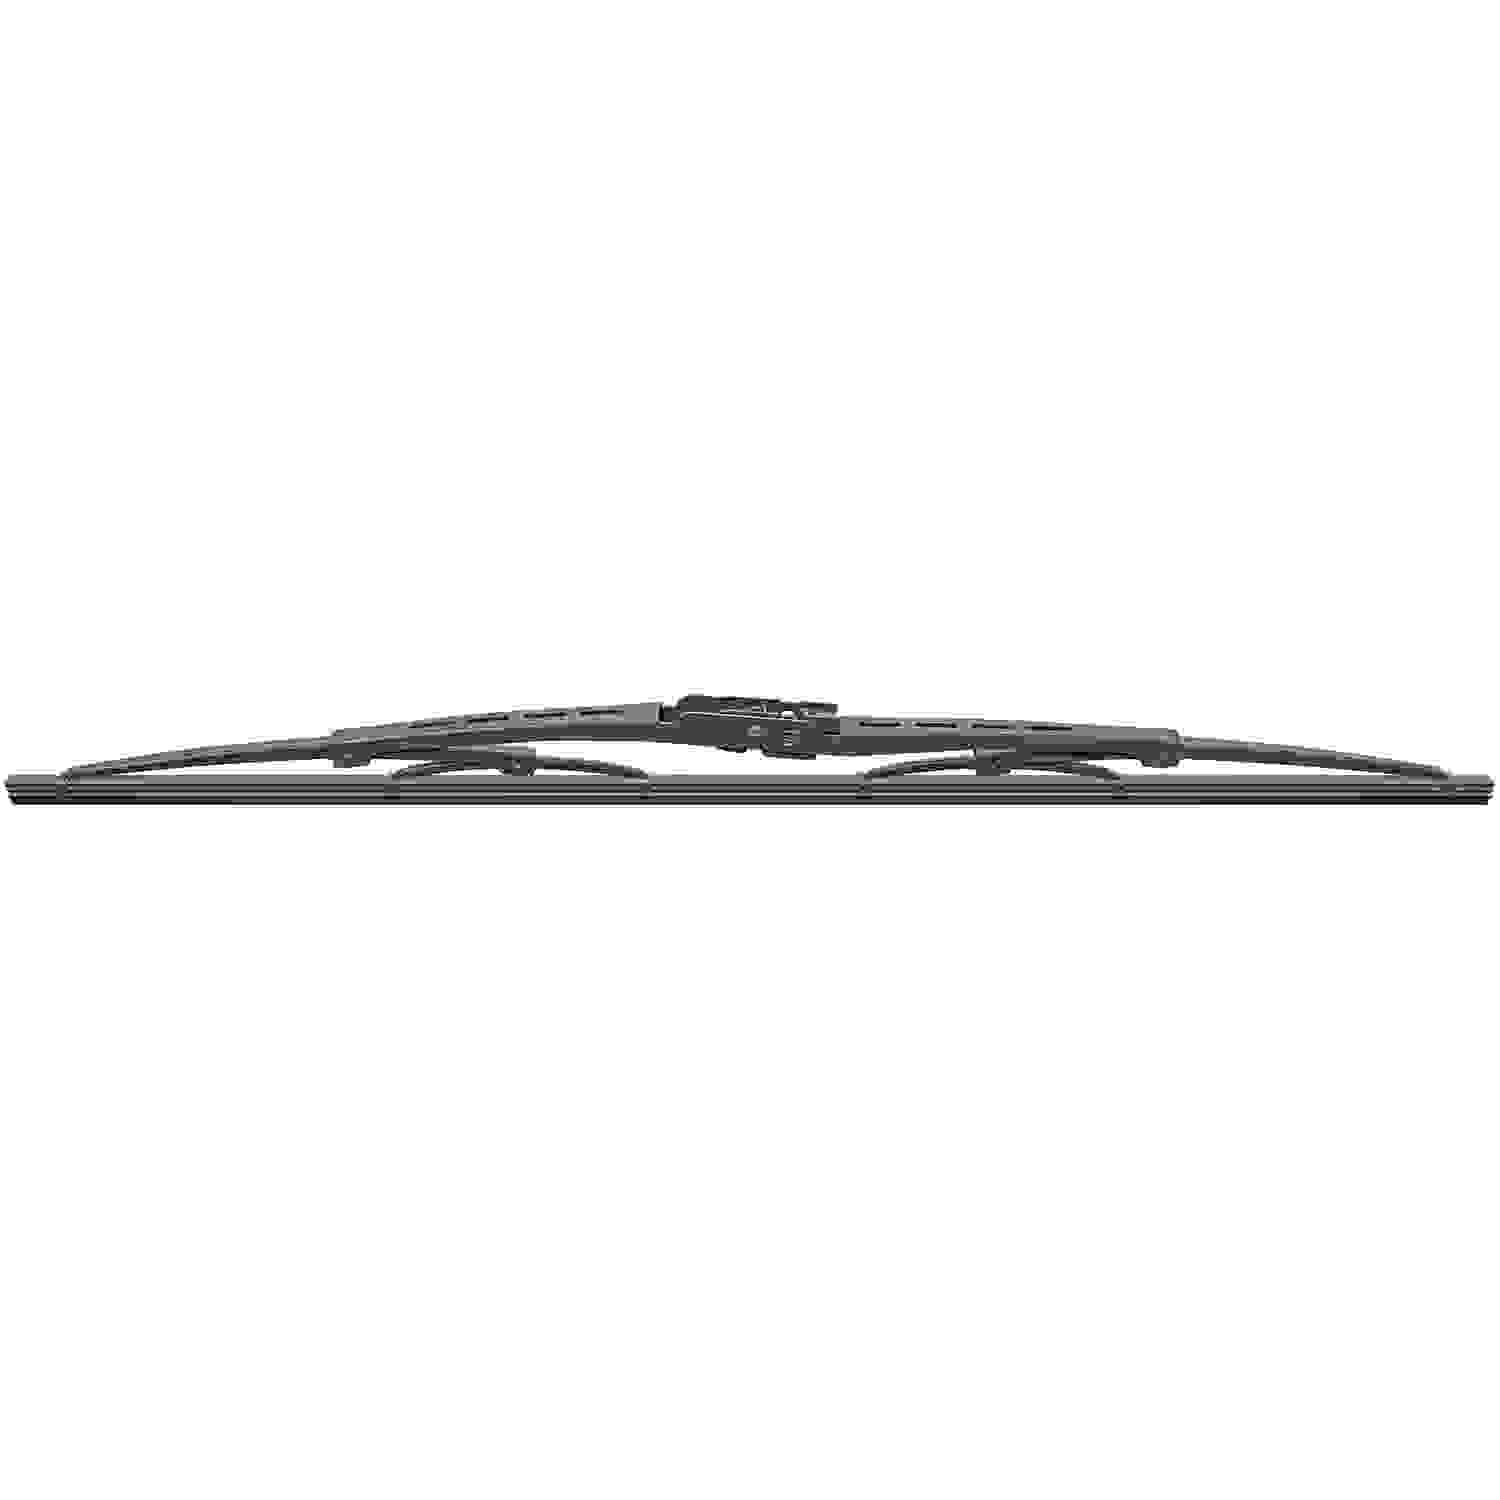 ANCO WIPER PRODUCTS - 31-series Wiper Blade (Front) - ANC 31-20